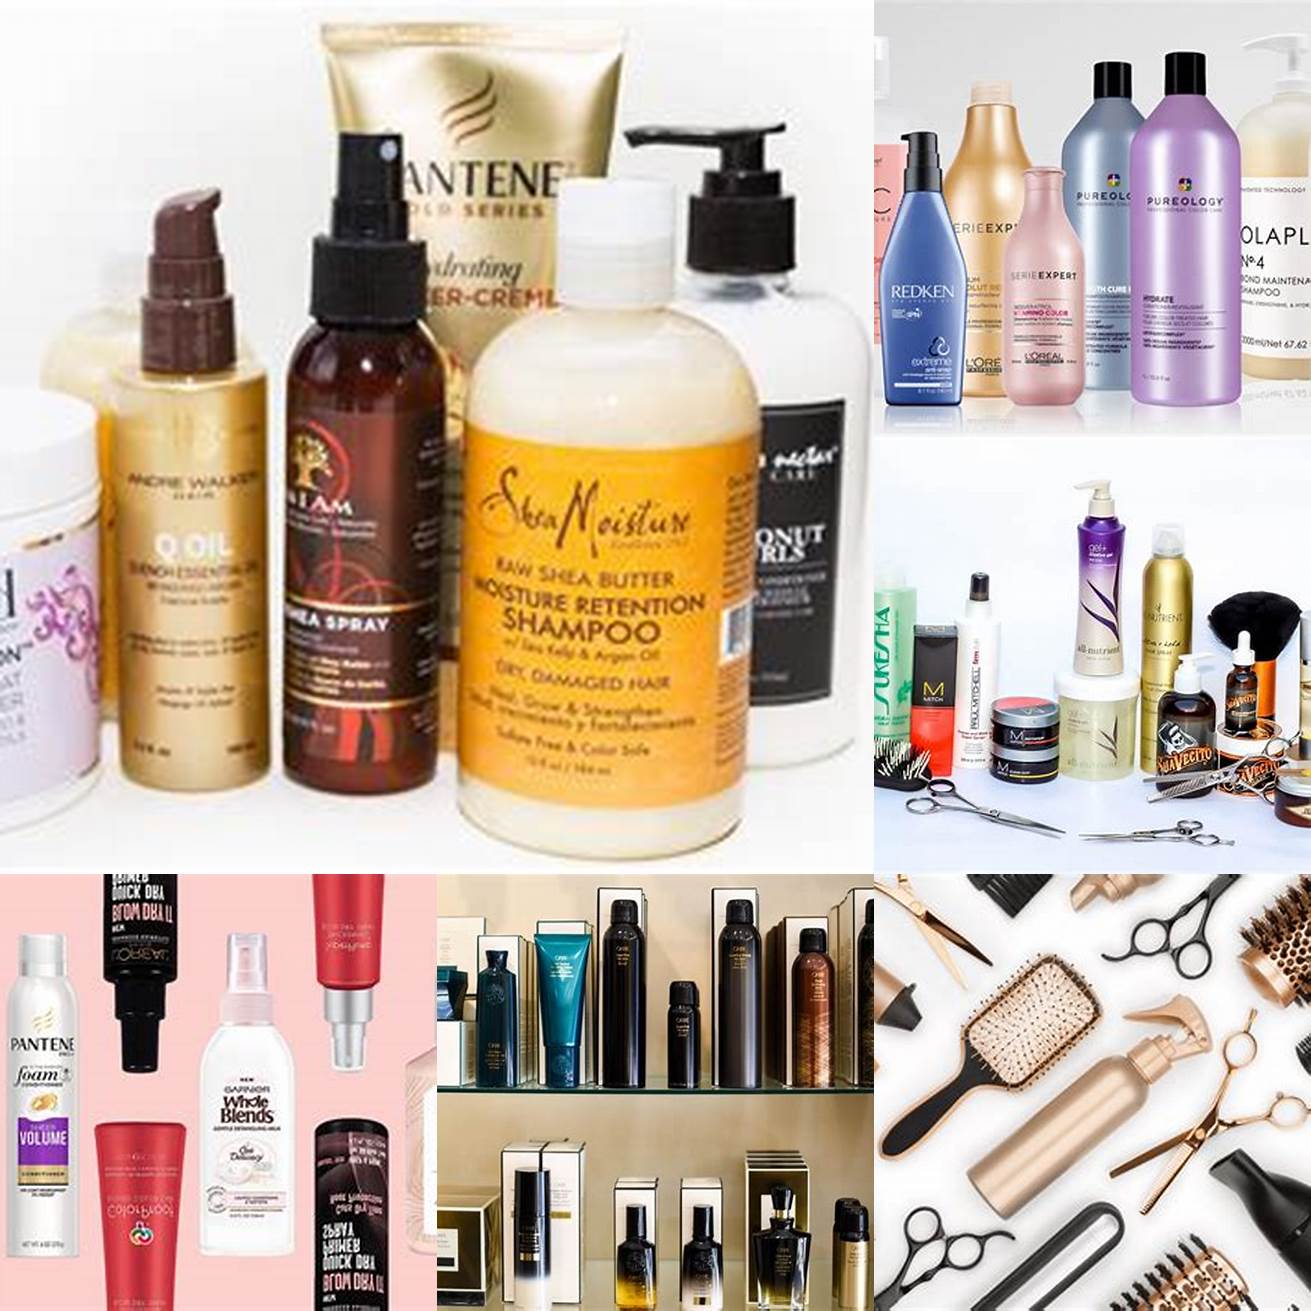 High-quality hair products used